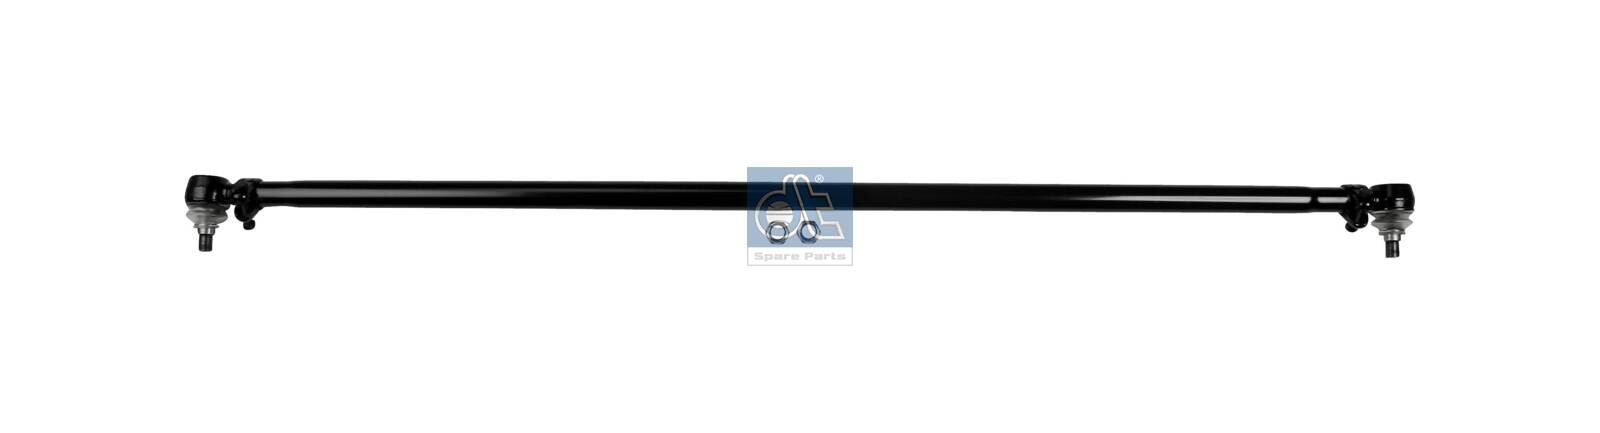 DT Spare Parts 4.64591 Rod Assembly A970 330 0003